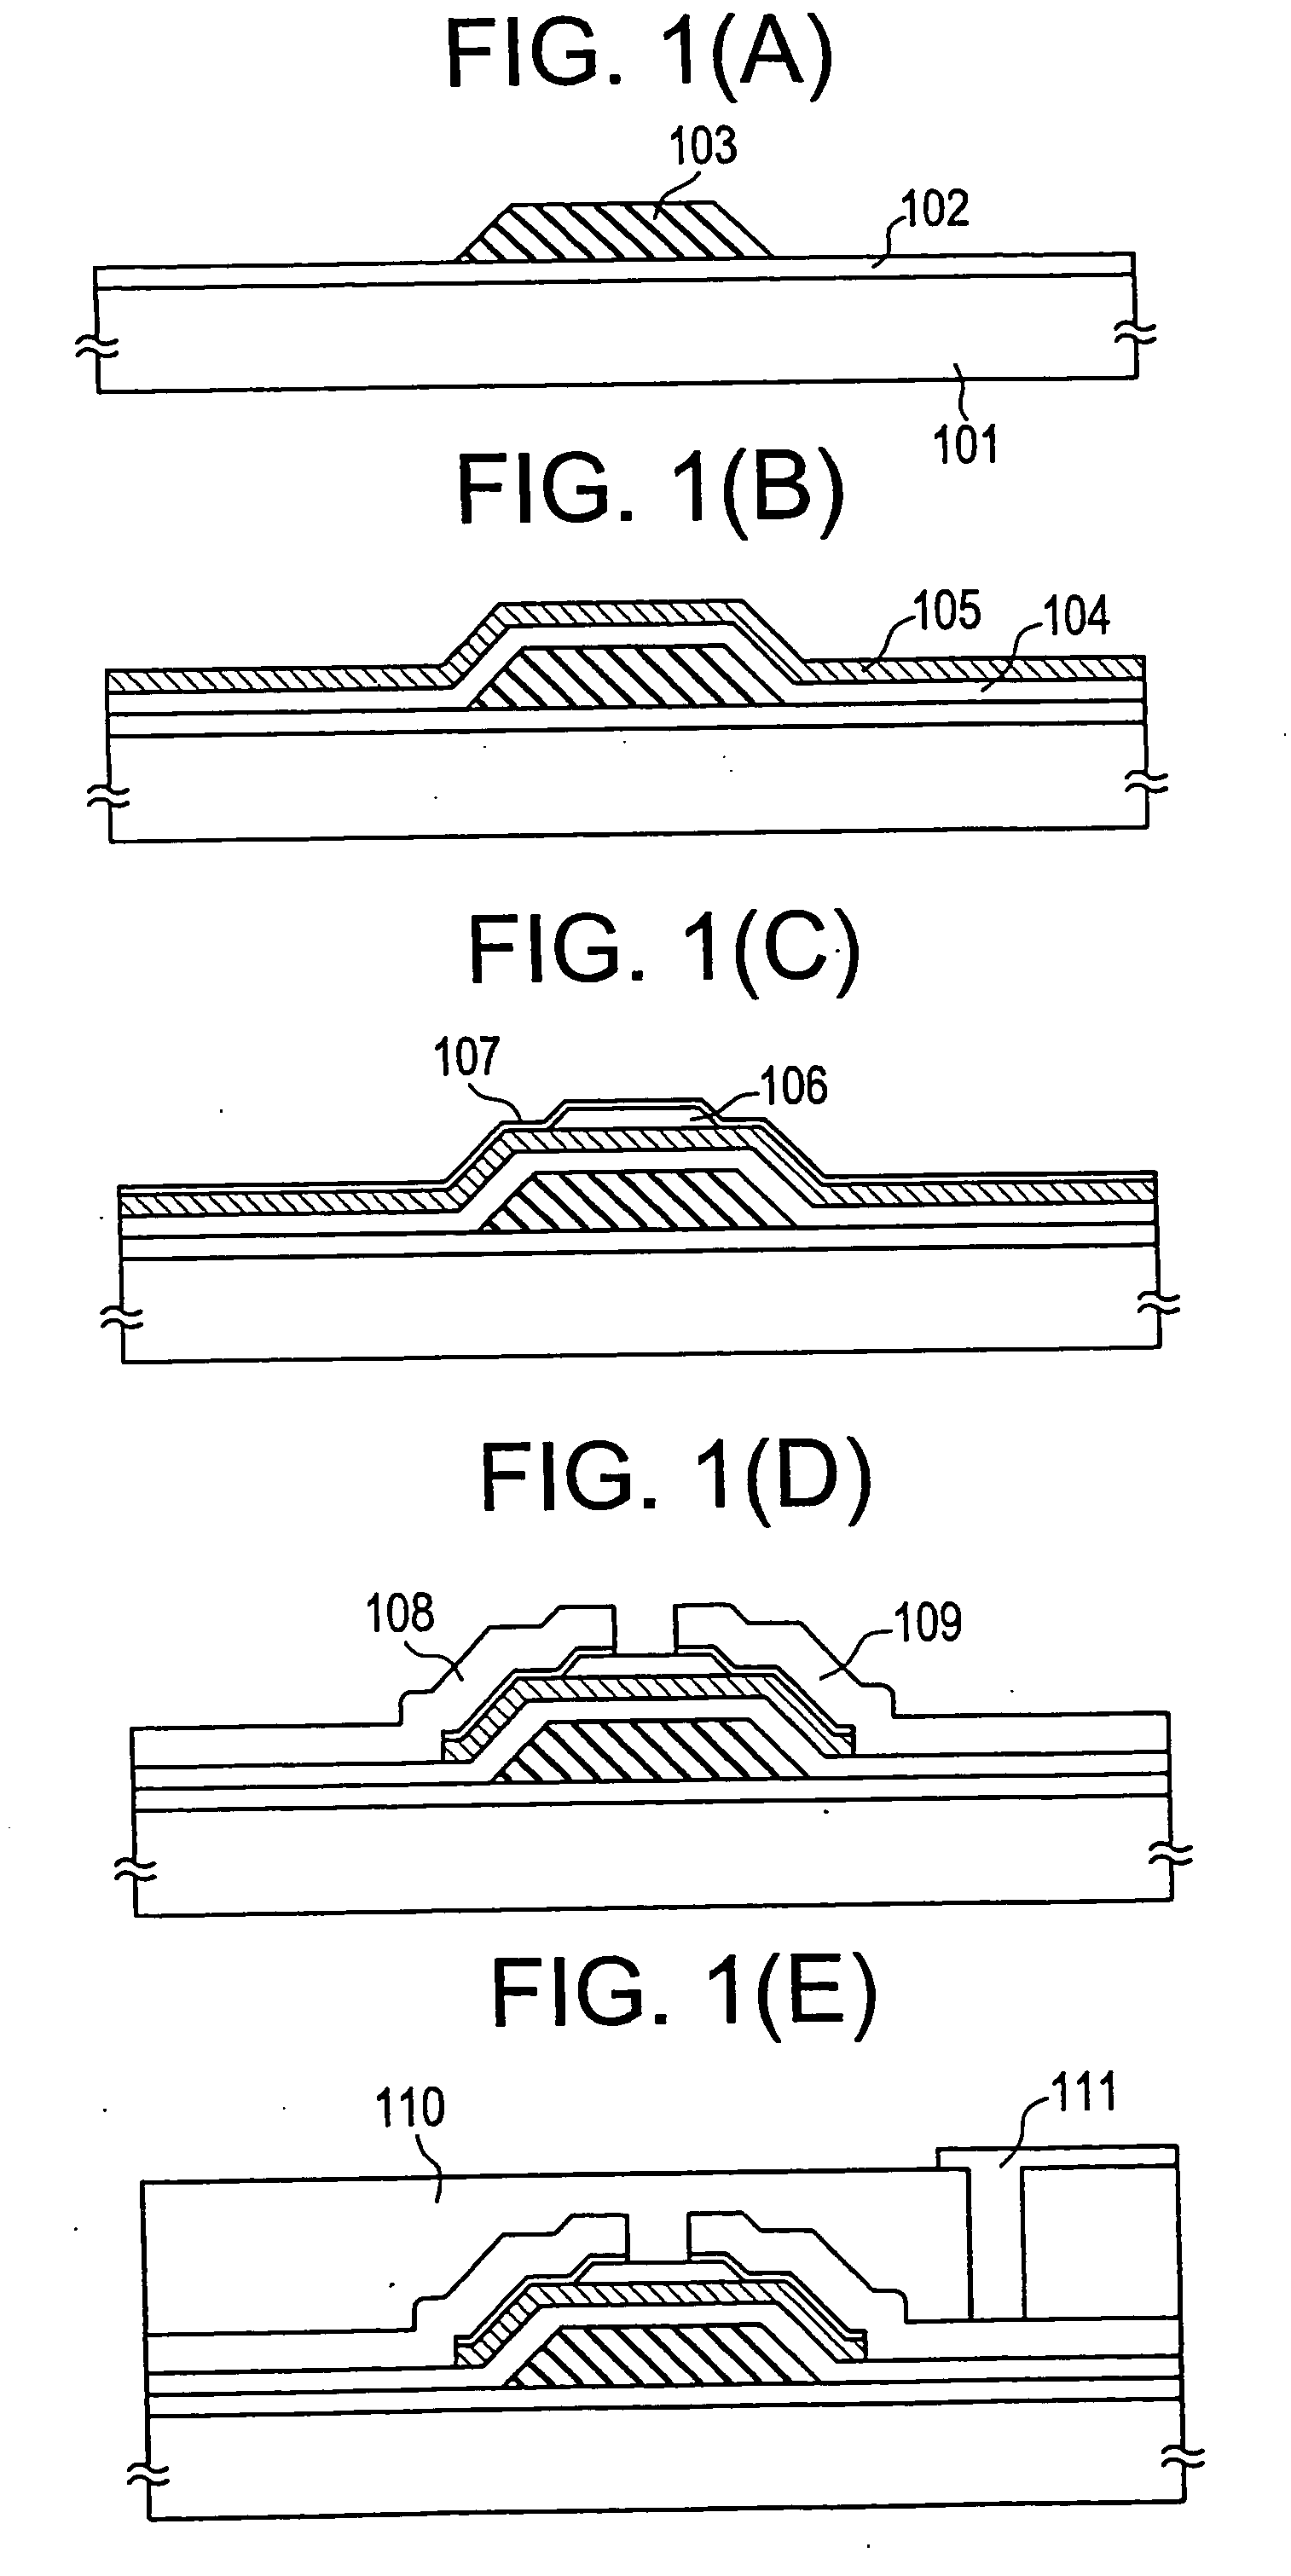 Semiconductor device, method of fabricating same, and electrooptical device